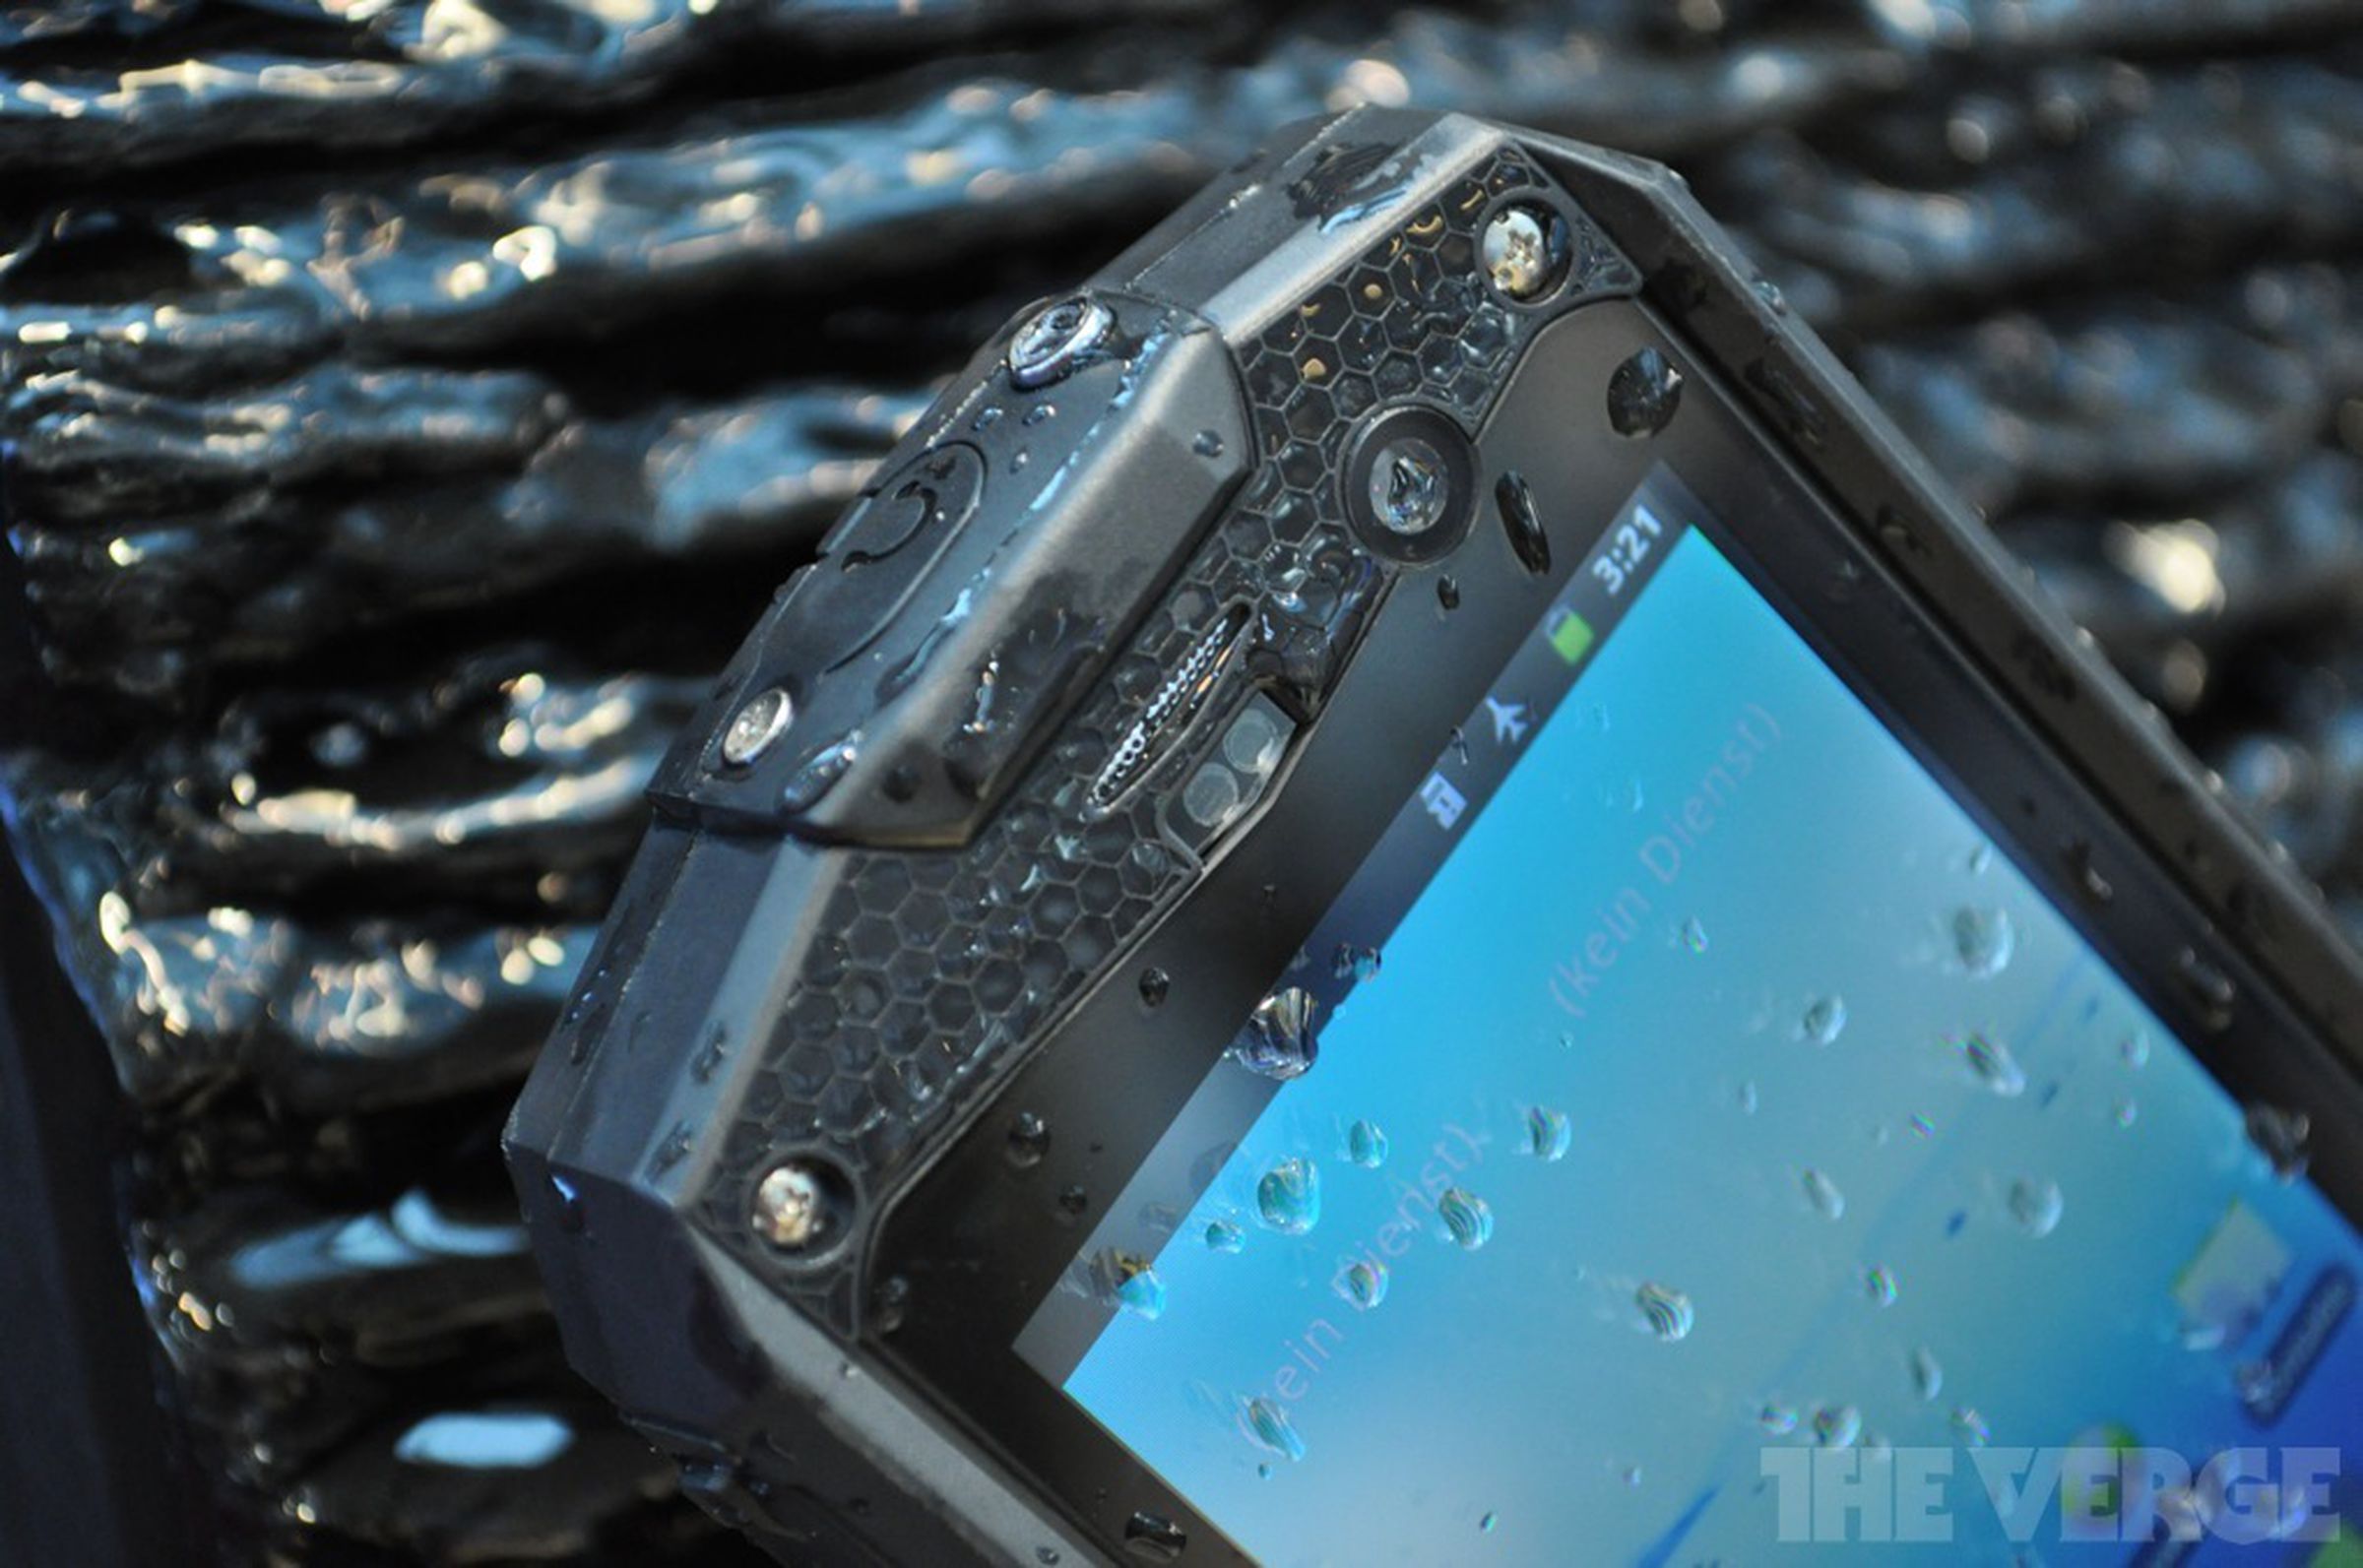 Caterpillar CAT B10 rugged smartphone hands-on pictures